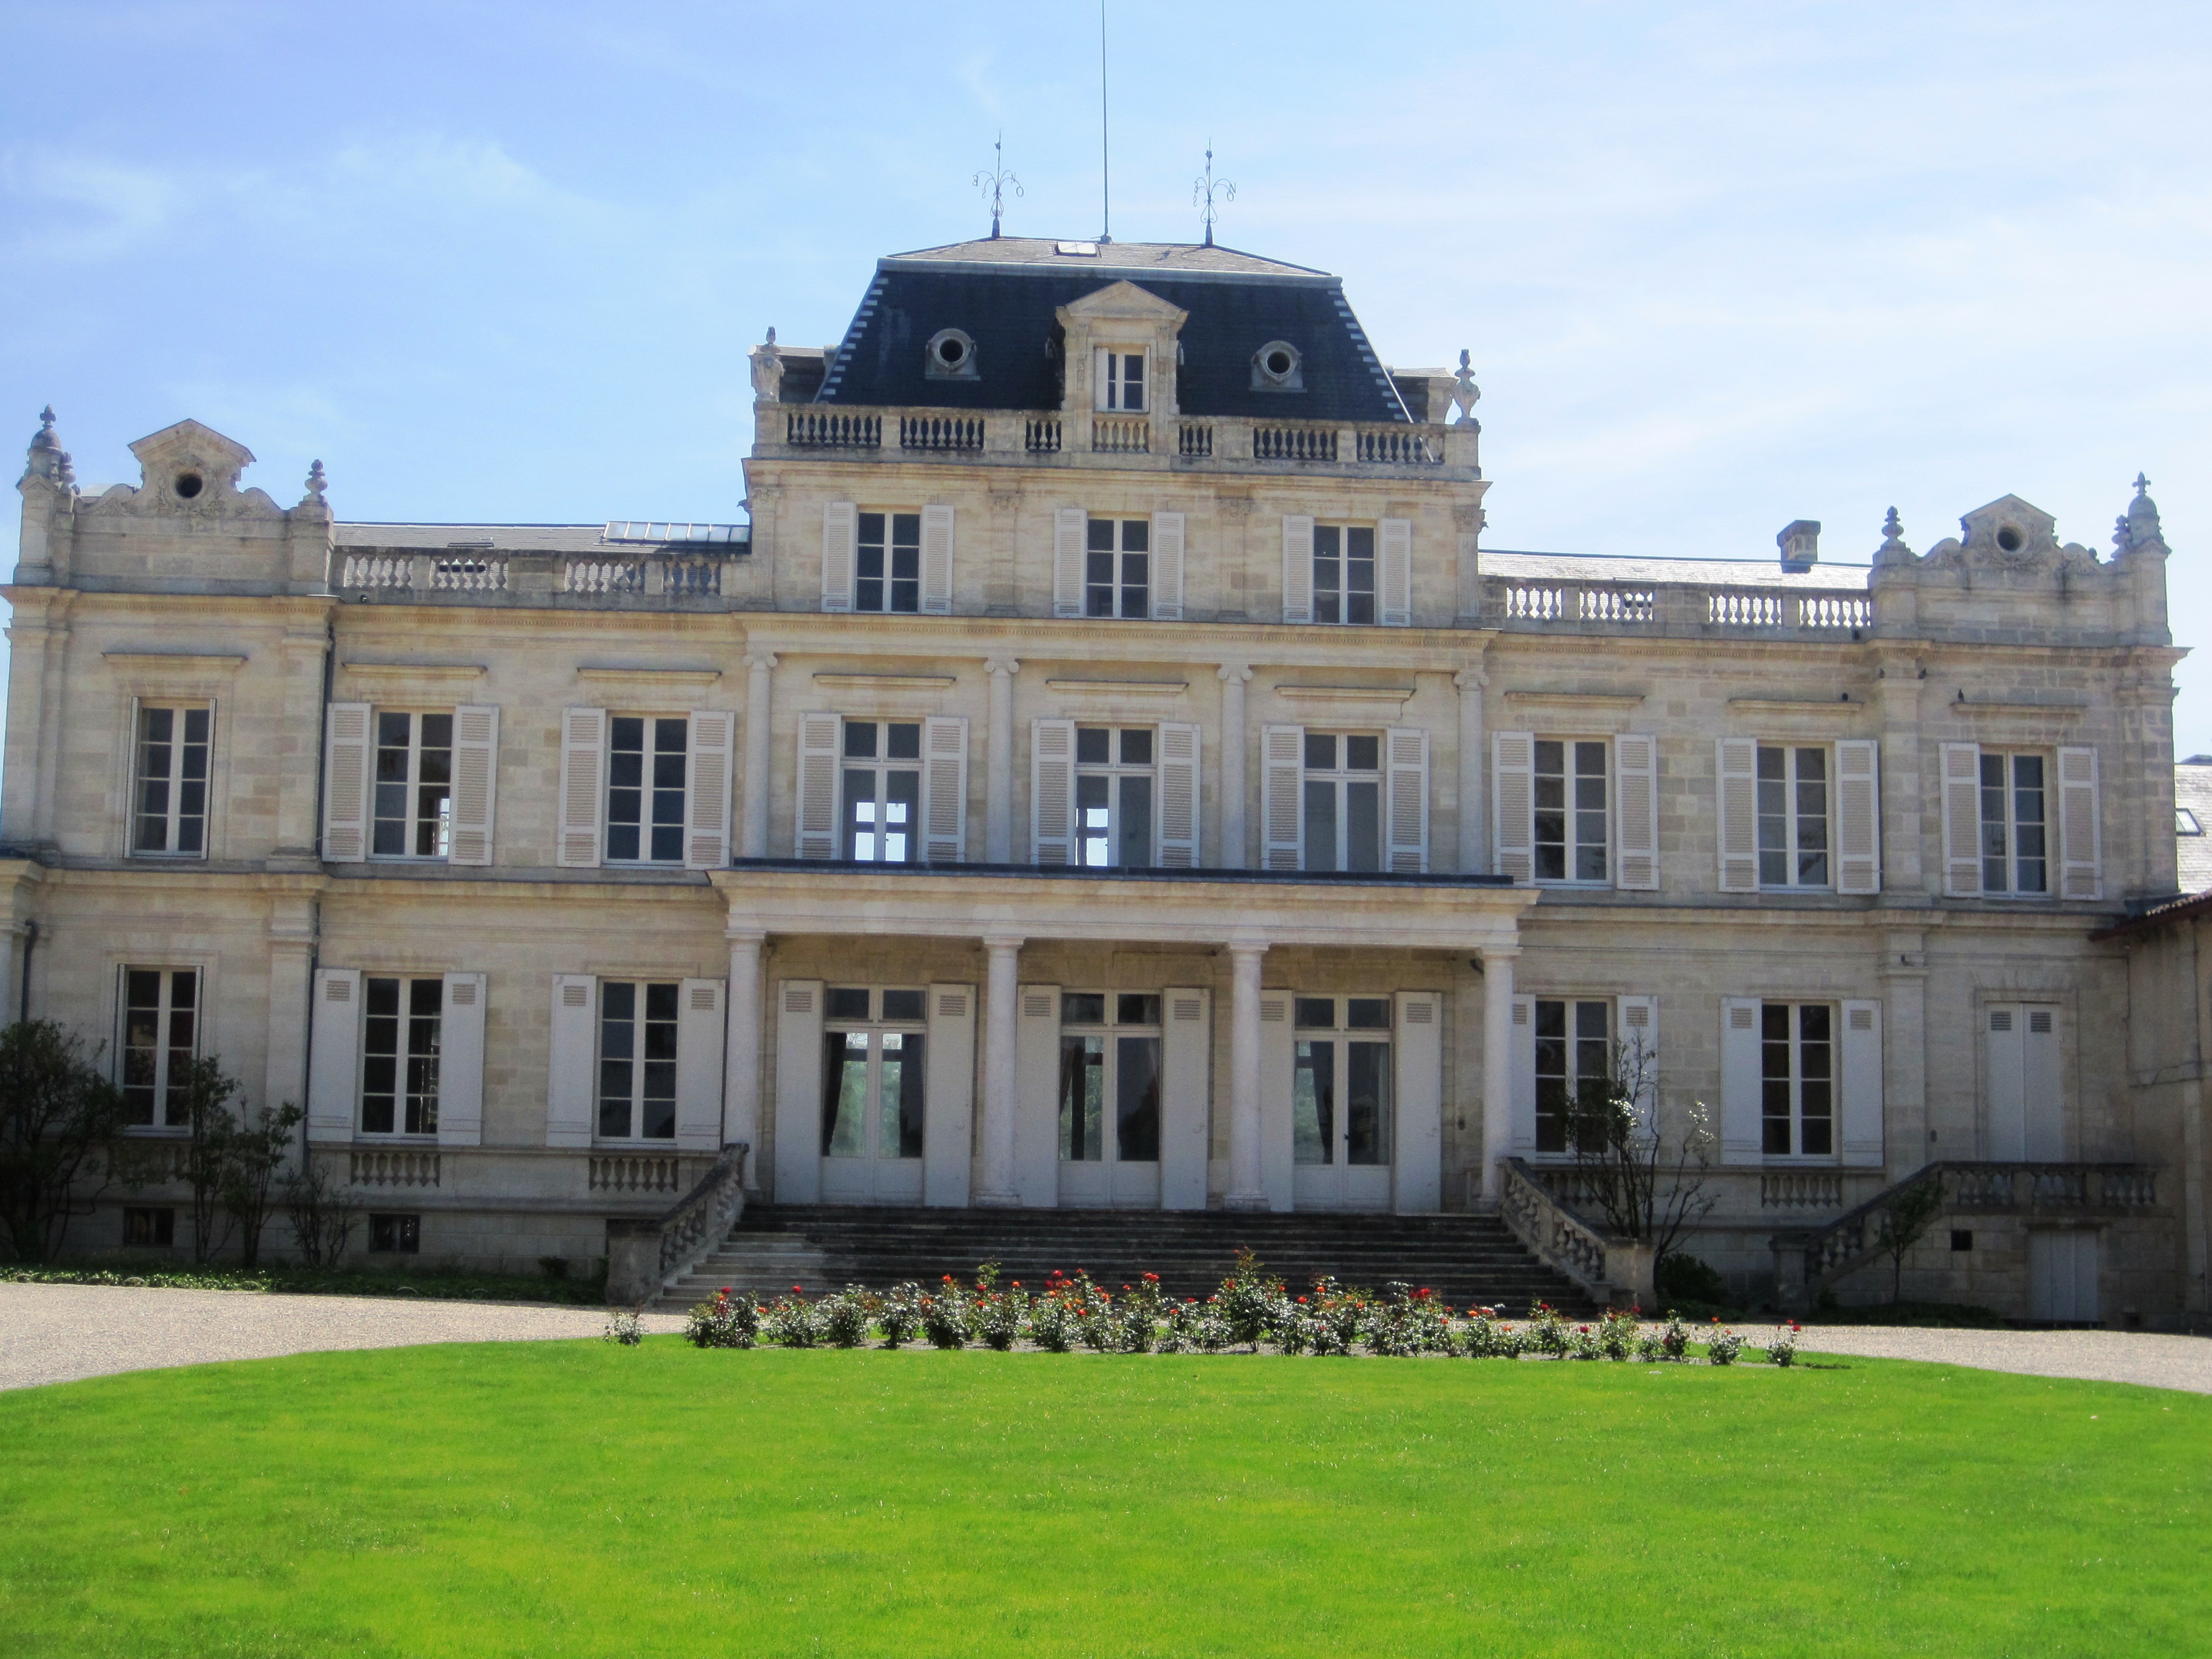 http://www.thewinecellarinsider.com/wp-content/uploads/2010/06/Giscours1.jpg